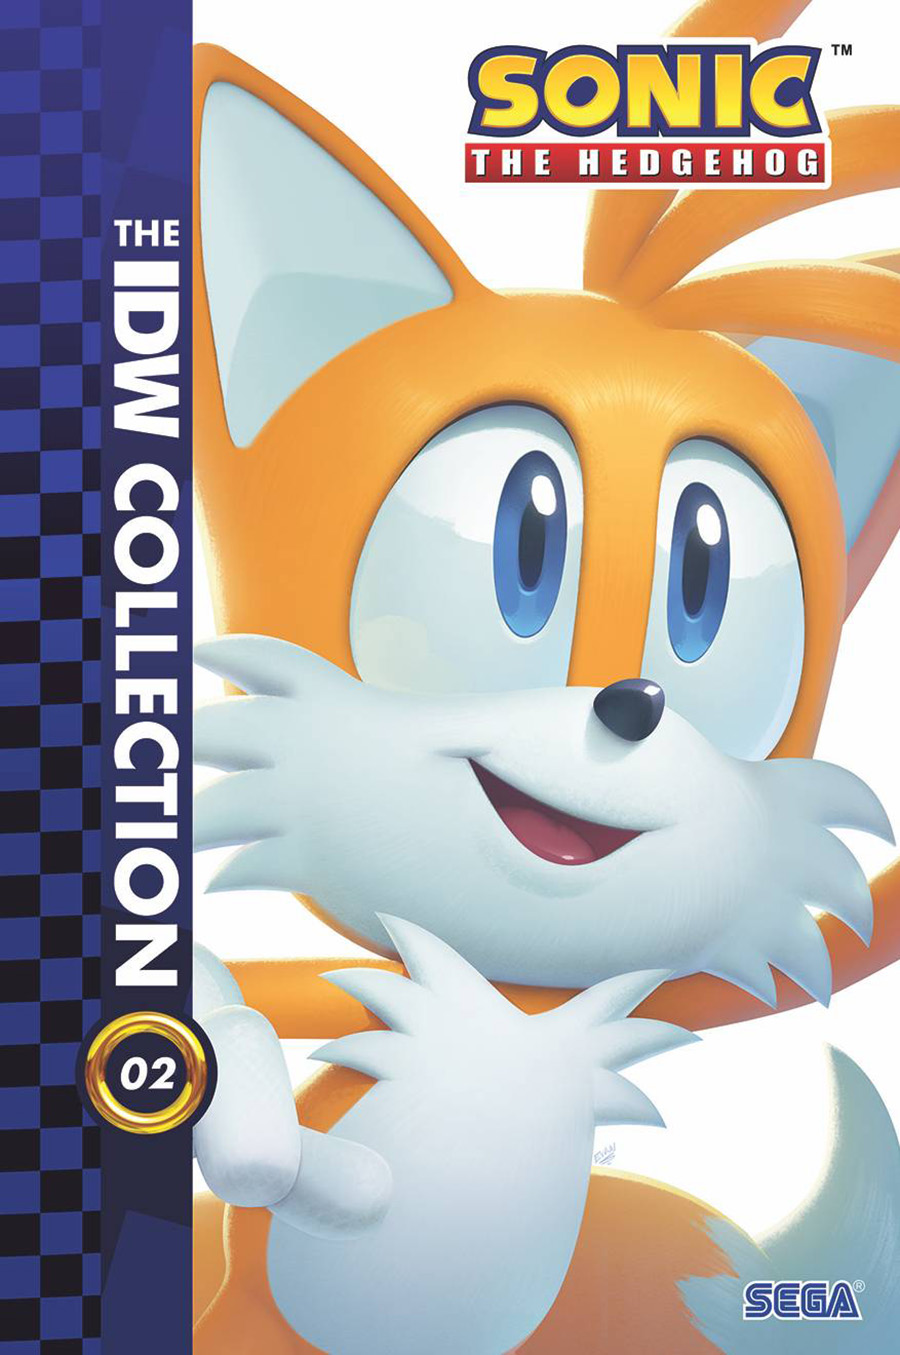 Sonic The Hedgehog IDW Collection Vol 2 HC